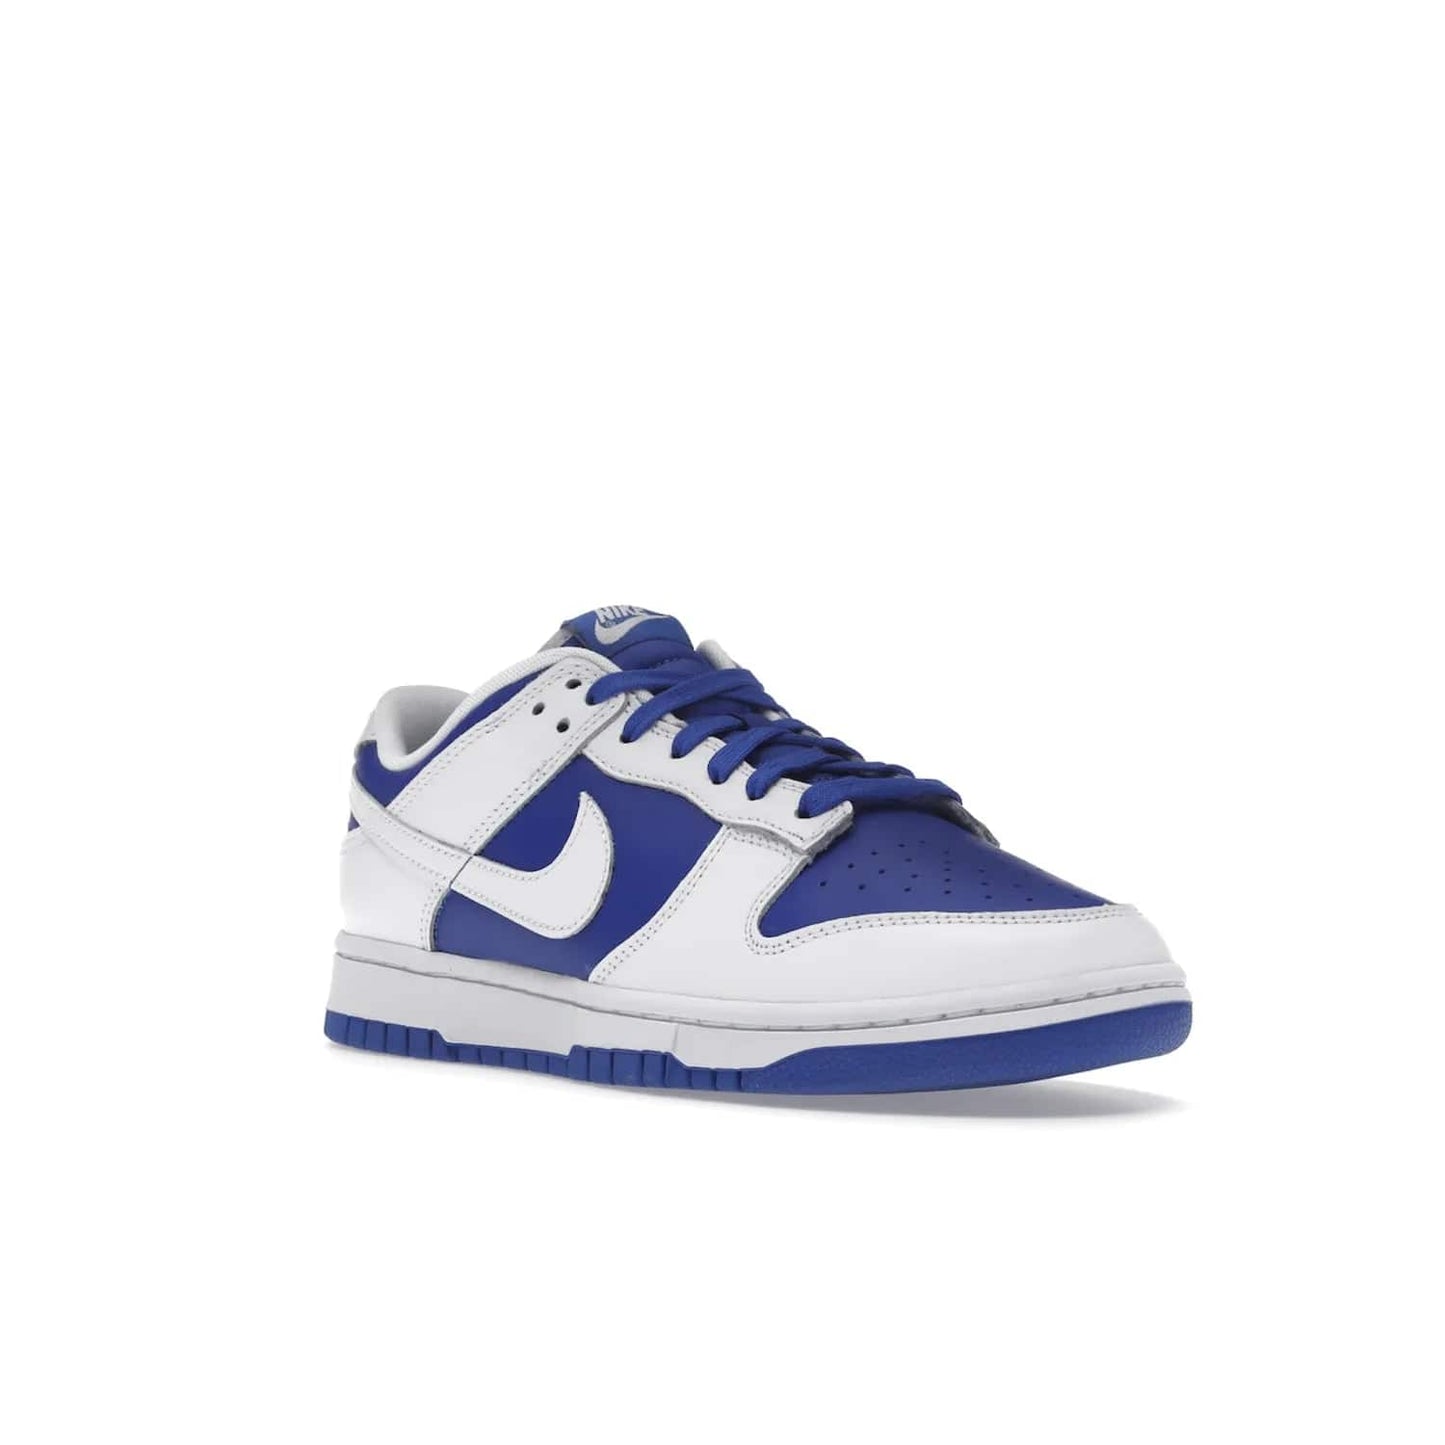 Nike Dunk Low Racer Blue White - Image 6 - Only at www.BallersClubKickz.com - Sleek Racer Blue leather upper and white leather overlays make up the Nike Dunk Low Racer Blue White. Woven tag and heel embroidery for a 1985 Dunk look with a matching EVA foam sole completes the classic colorway.